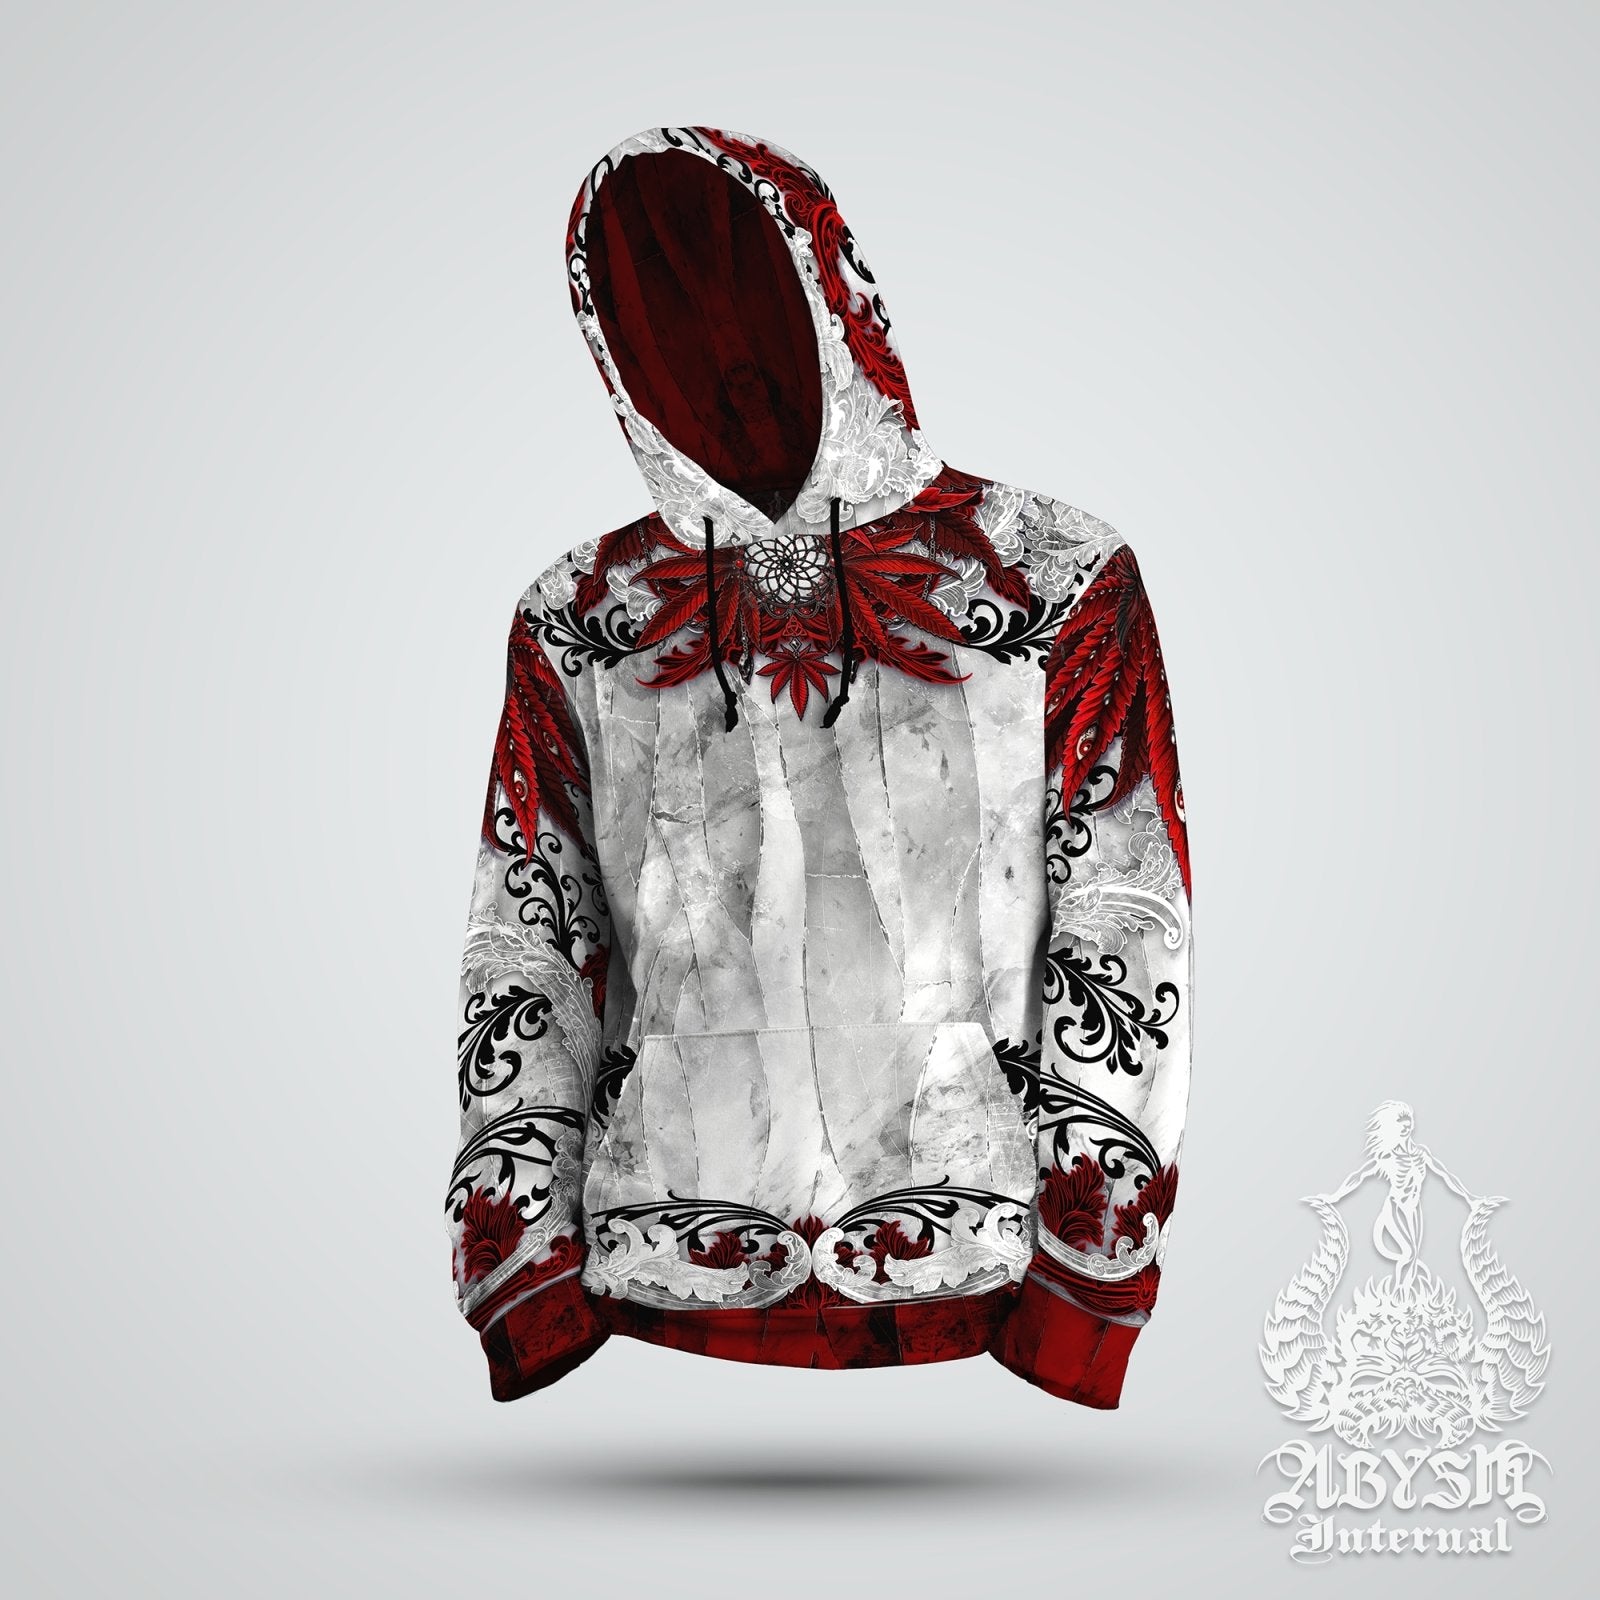 Cannabis Hoodie, Weed Clothes, Gothic Festival Outfit, White Goth Streetwear, Indie and Alternative Clothing, Unisex, 420 Gift - Bloody Red Marijuana - Abysm Internal